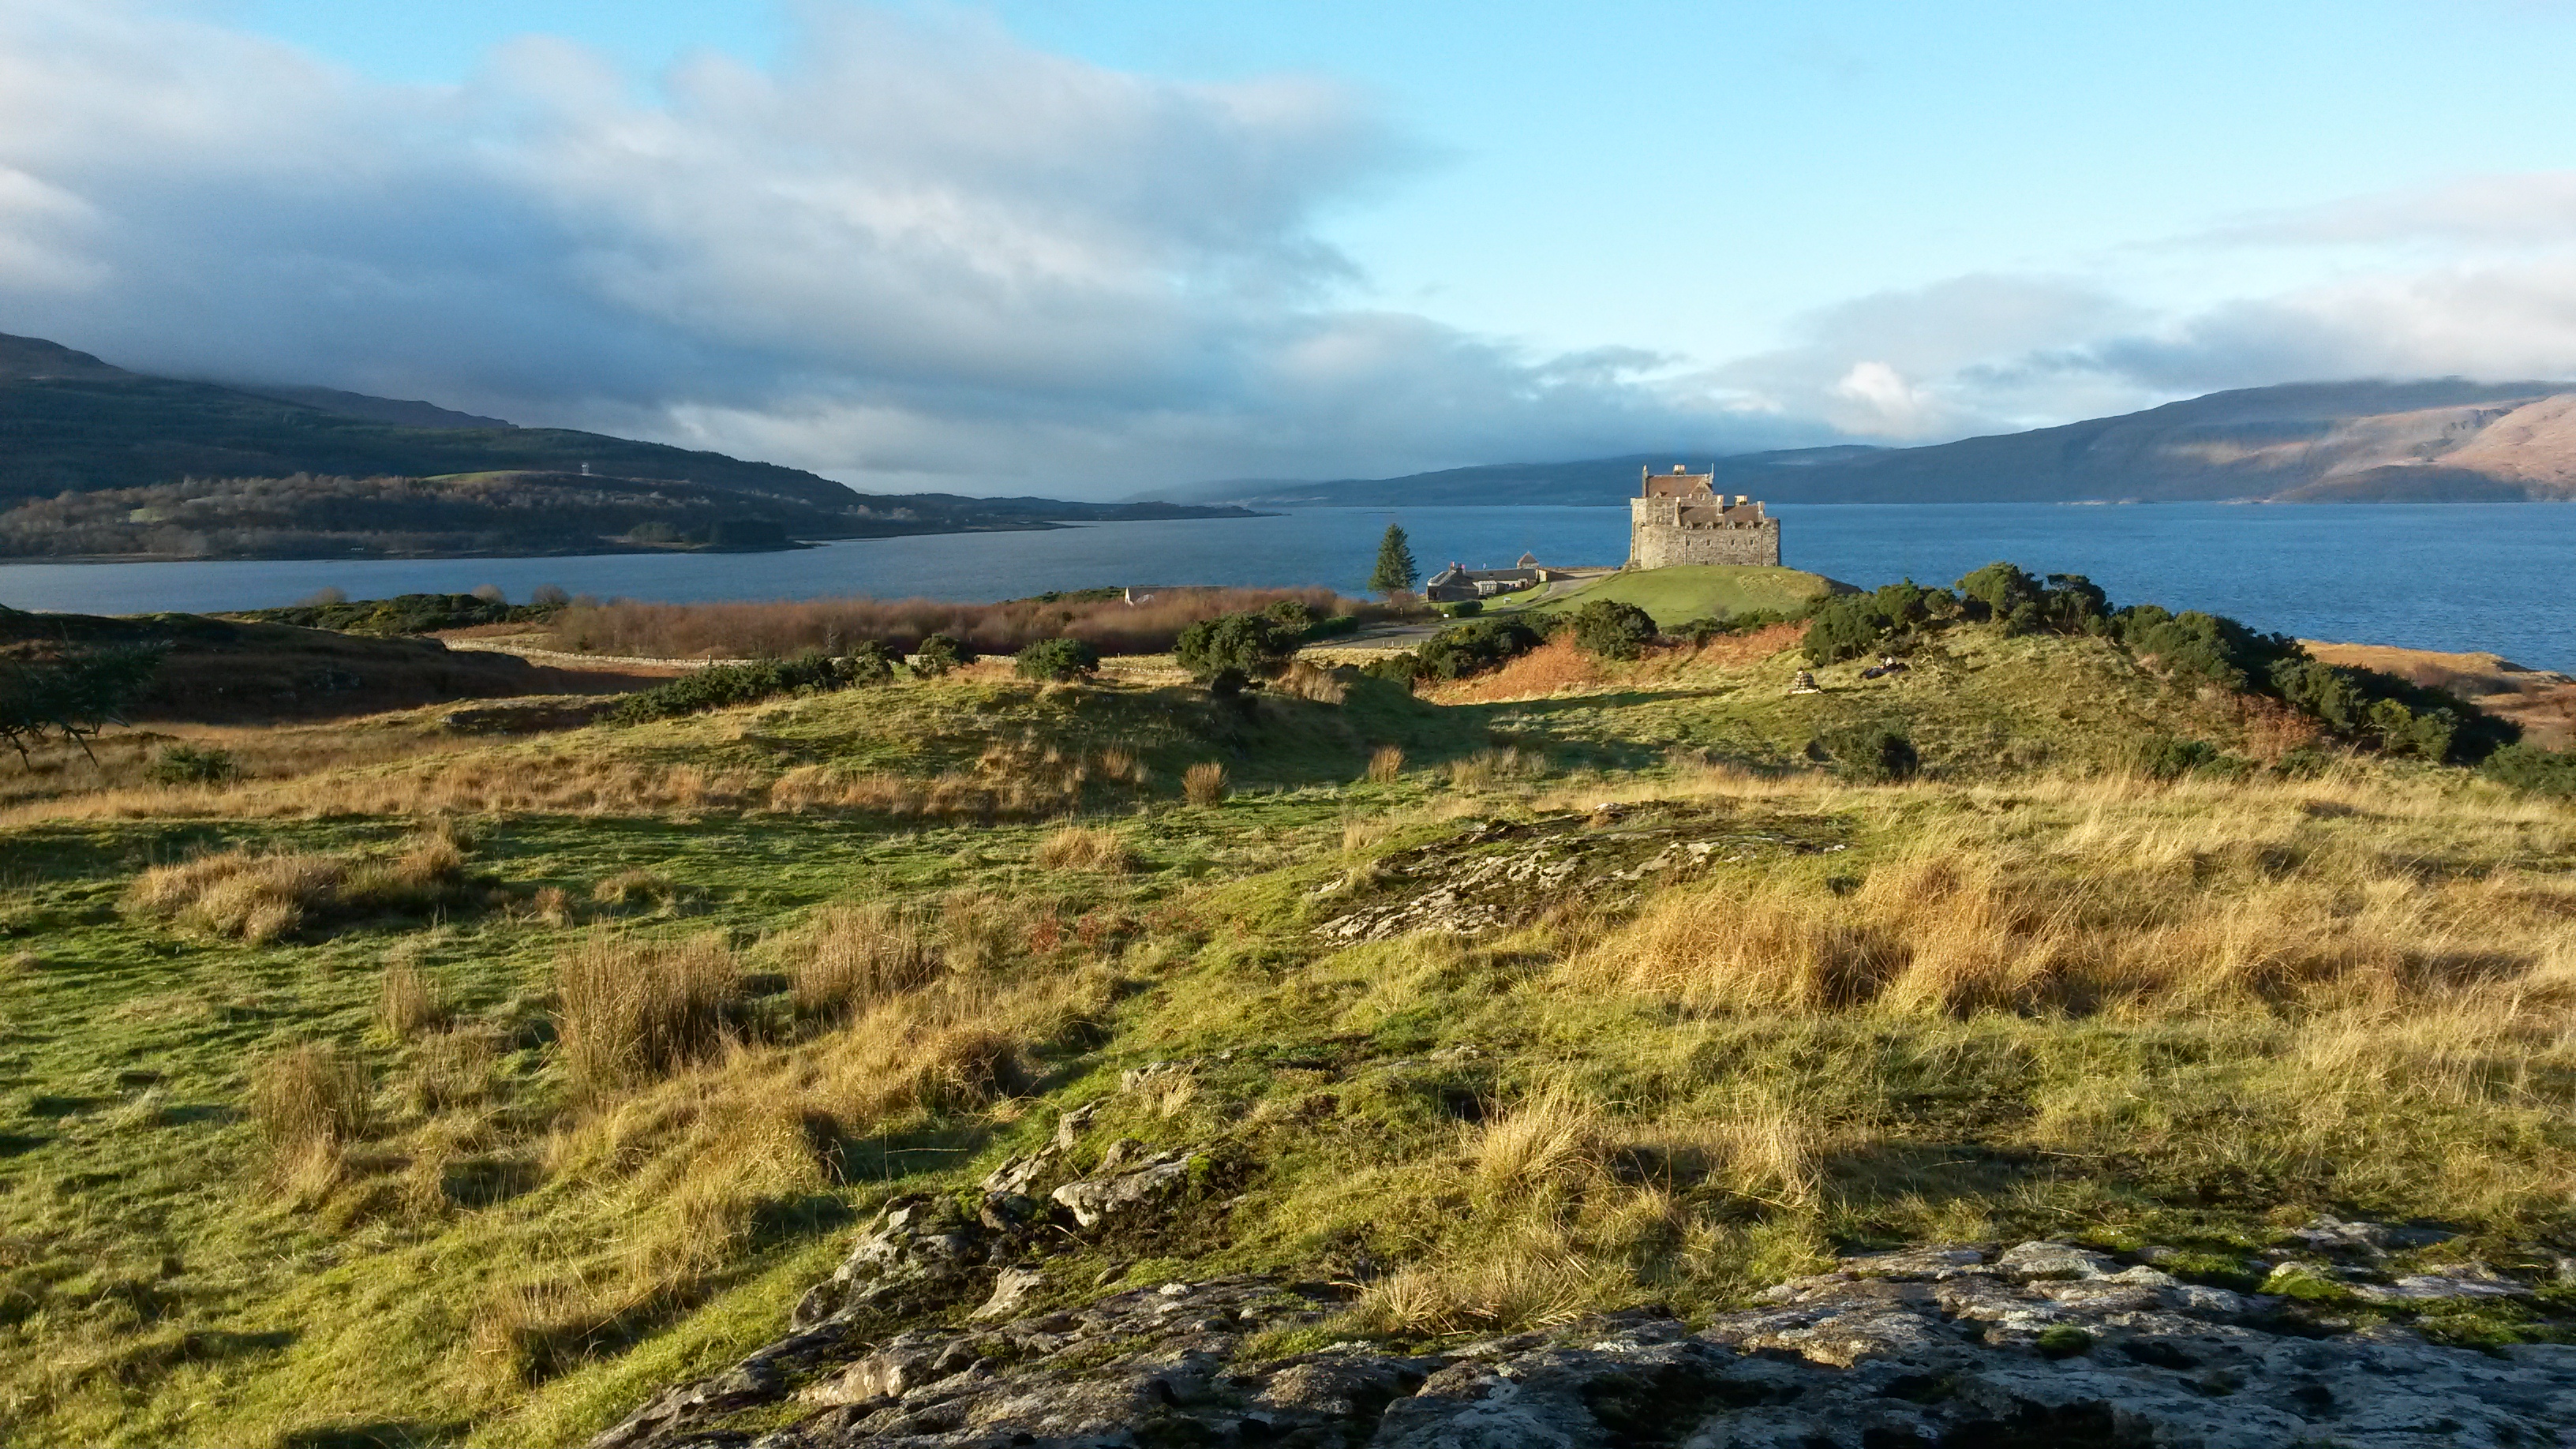 Duart Castle on Mull - can you spot the illustrators in the distance?